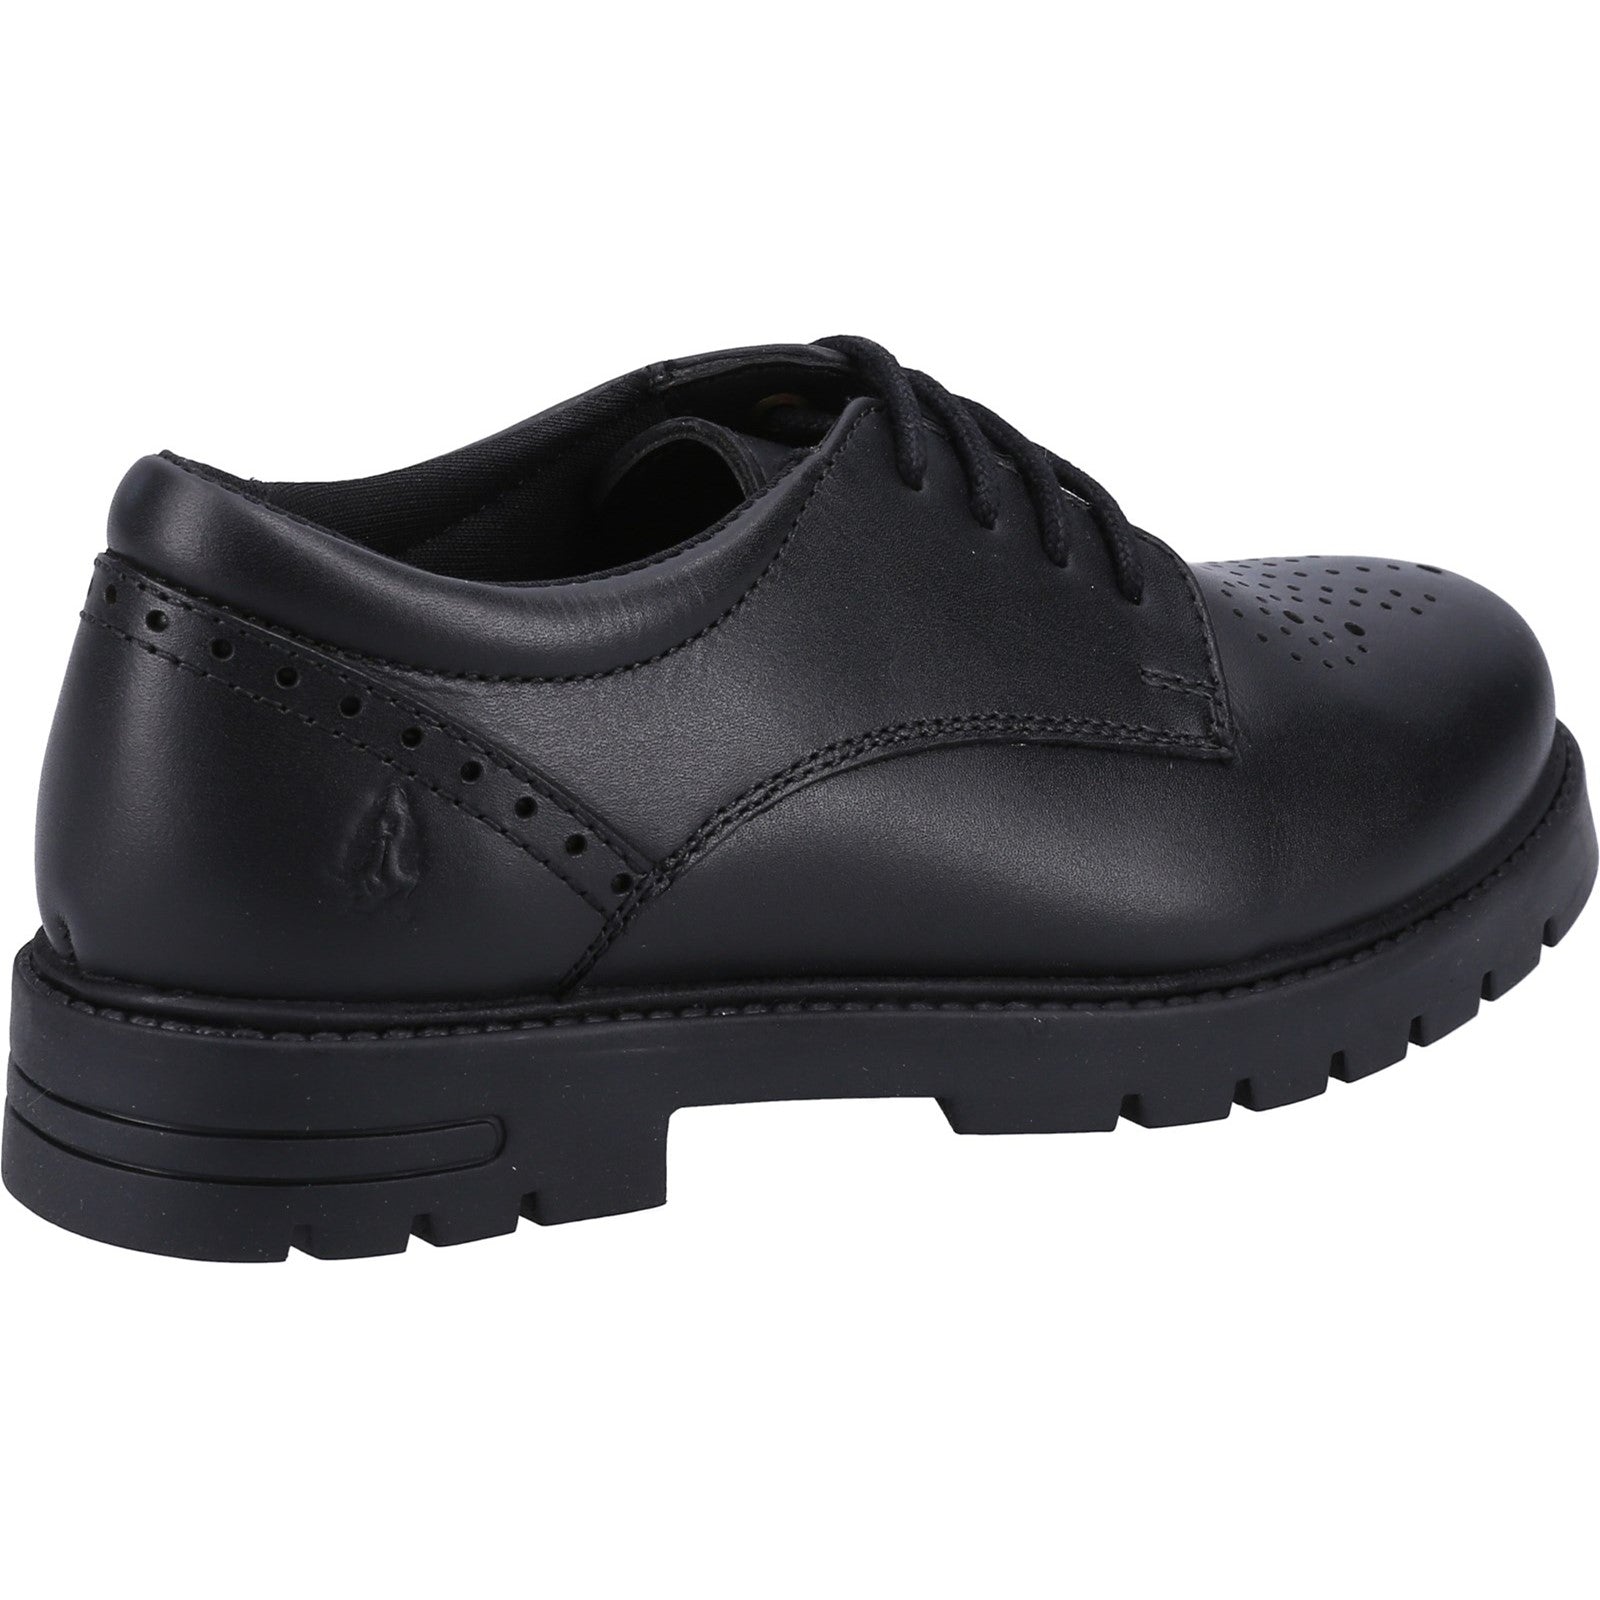 Hush Puppies Girls Jayne Lace Up Leather School Shoes - Black